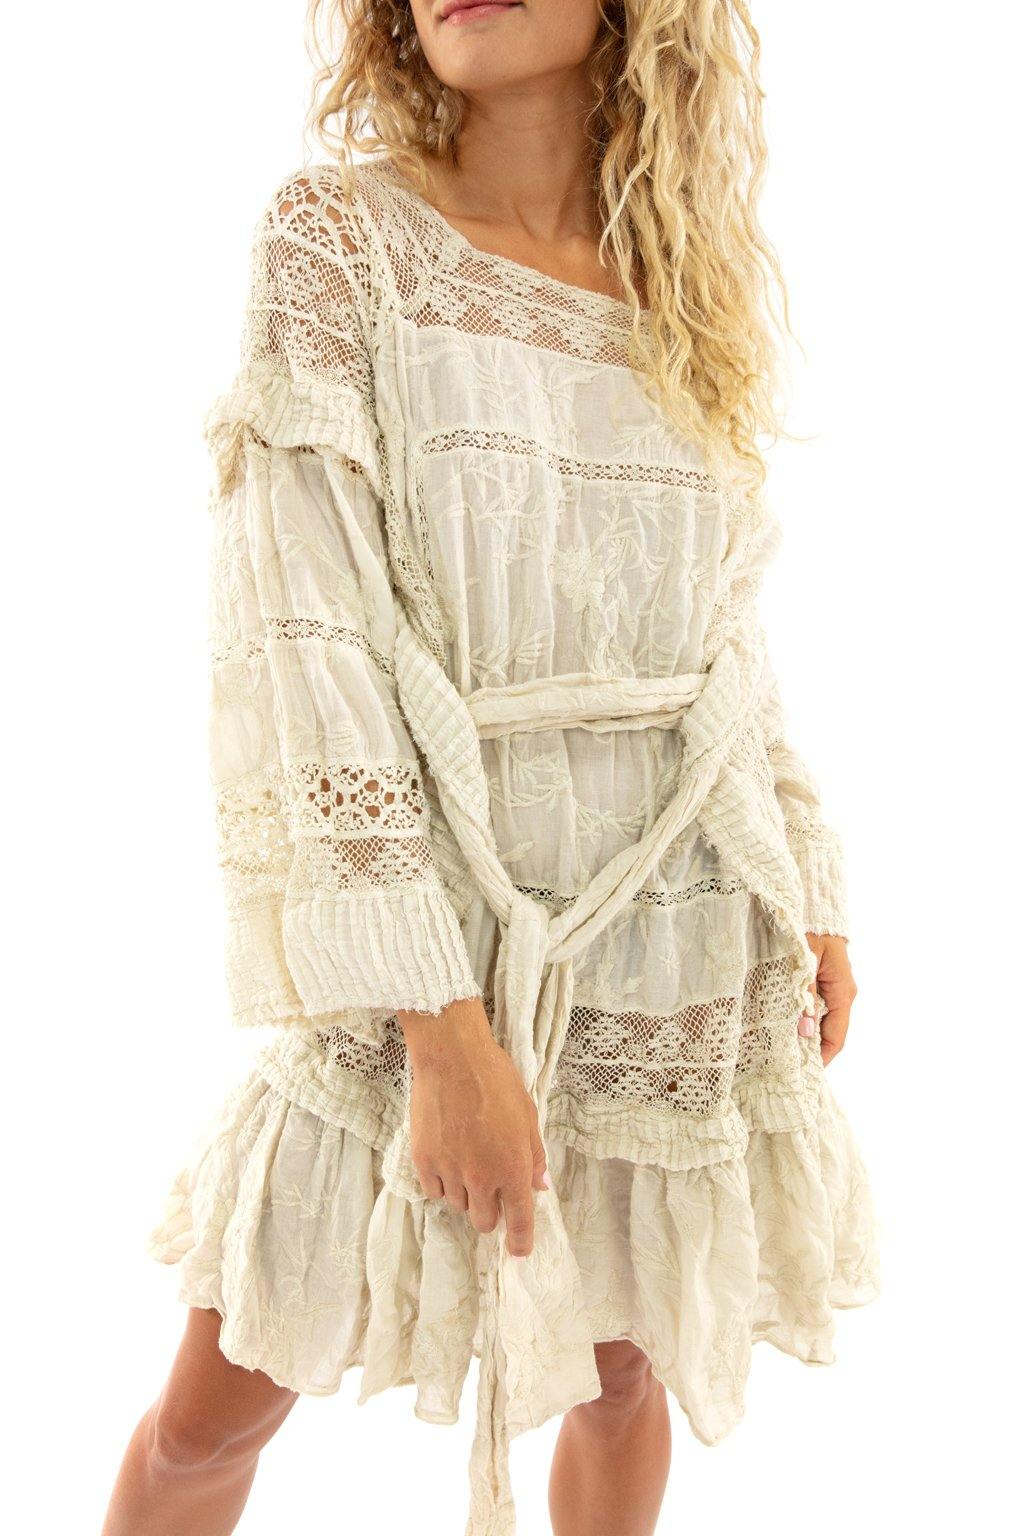 LACE POELLE TUNIC - Kingfisher Road - Online Boutique